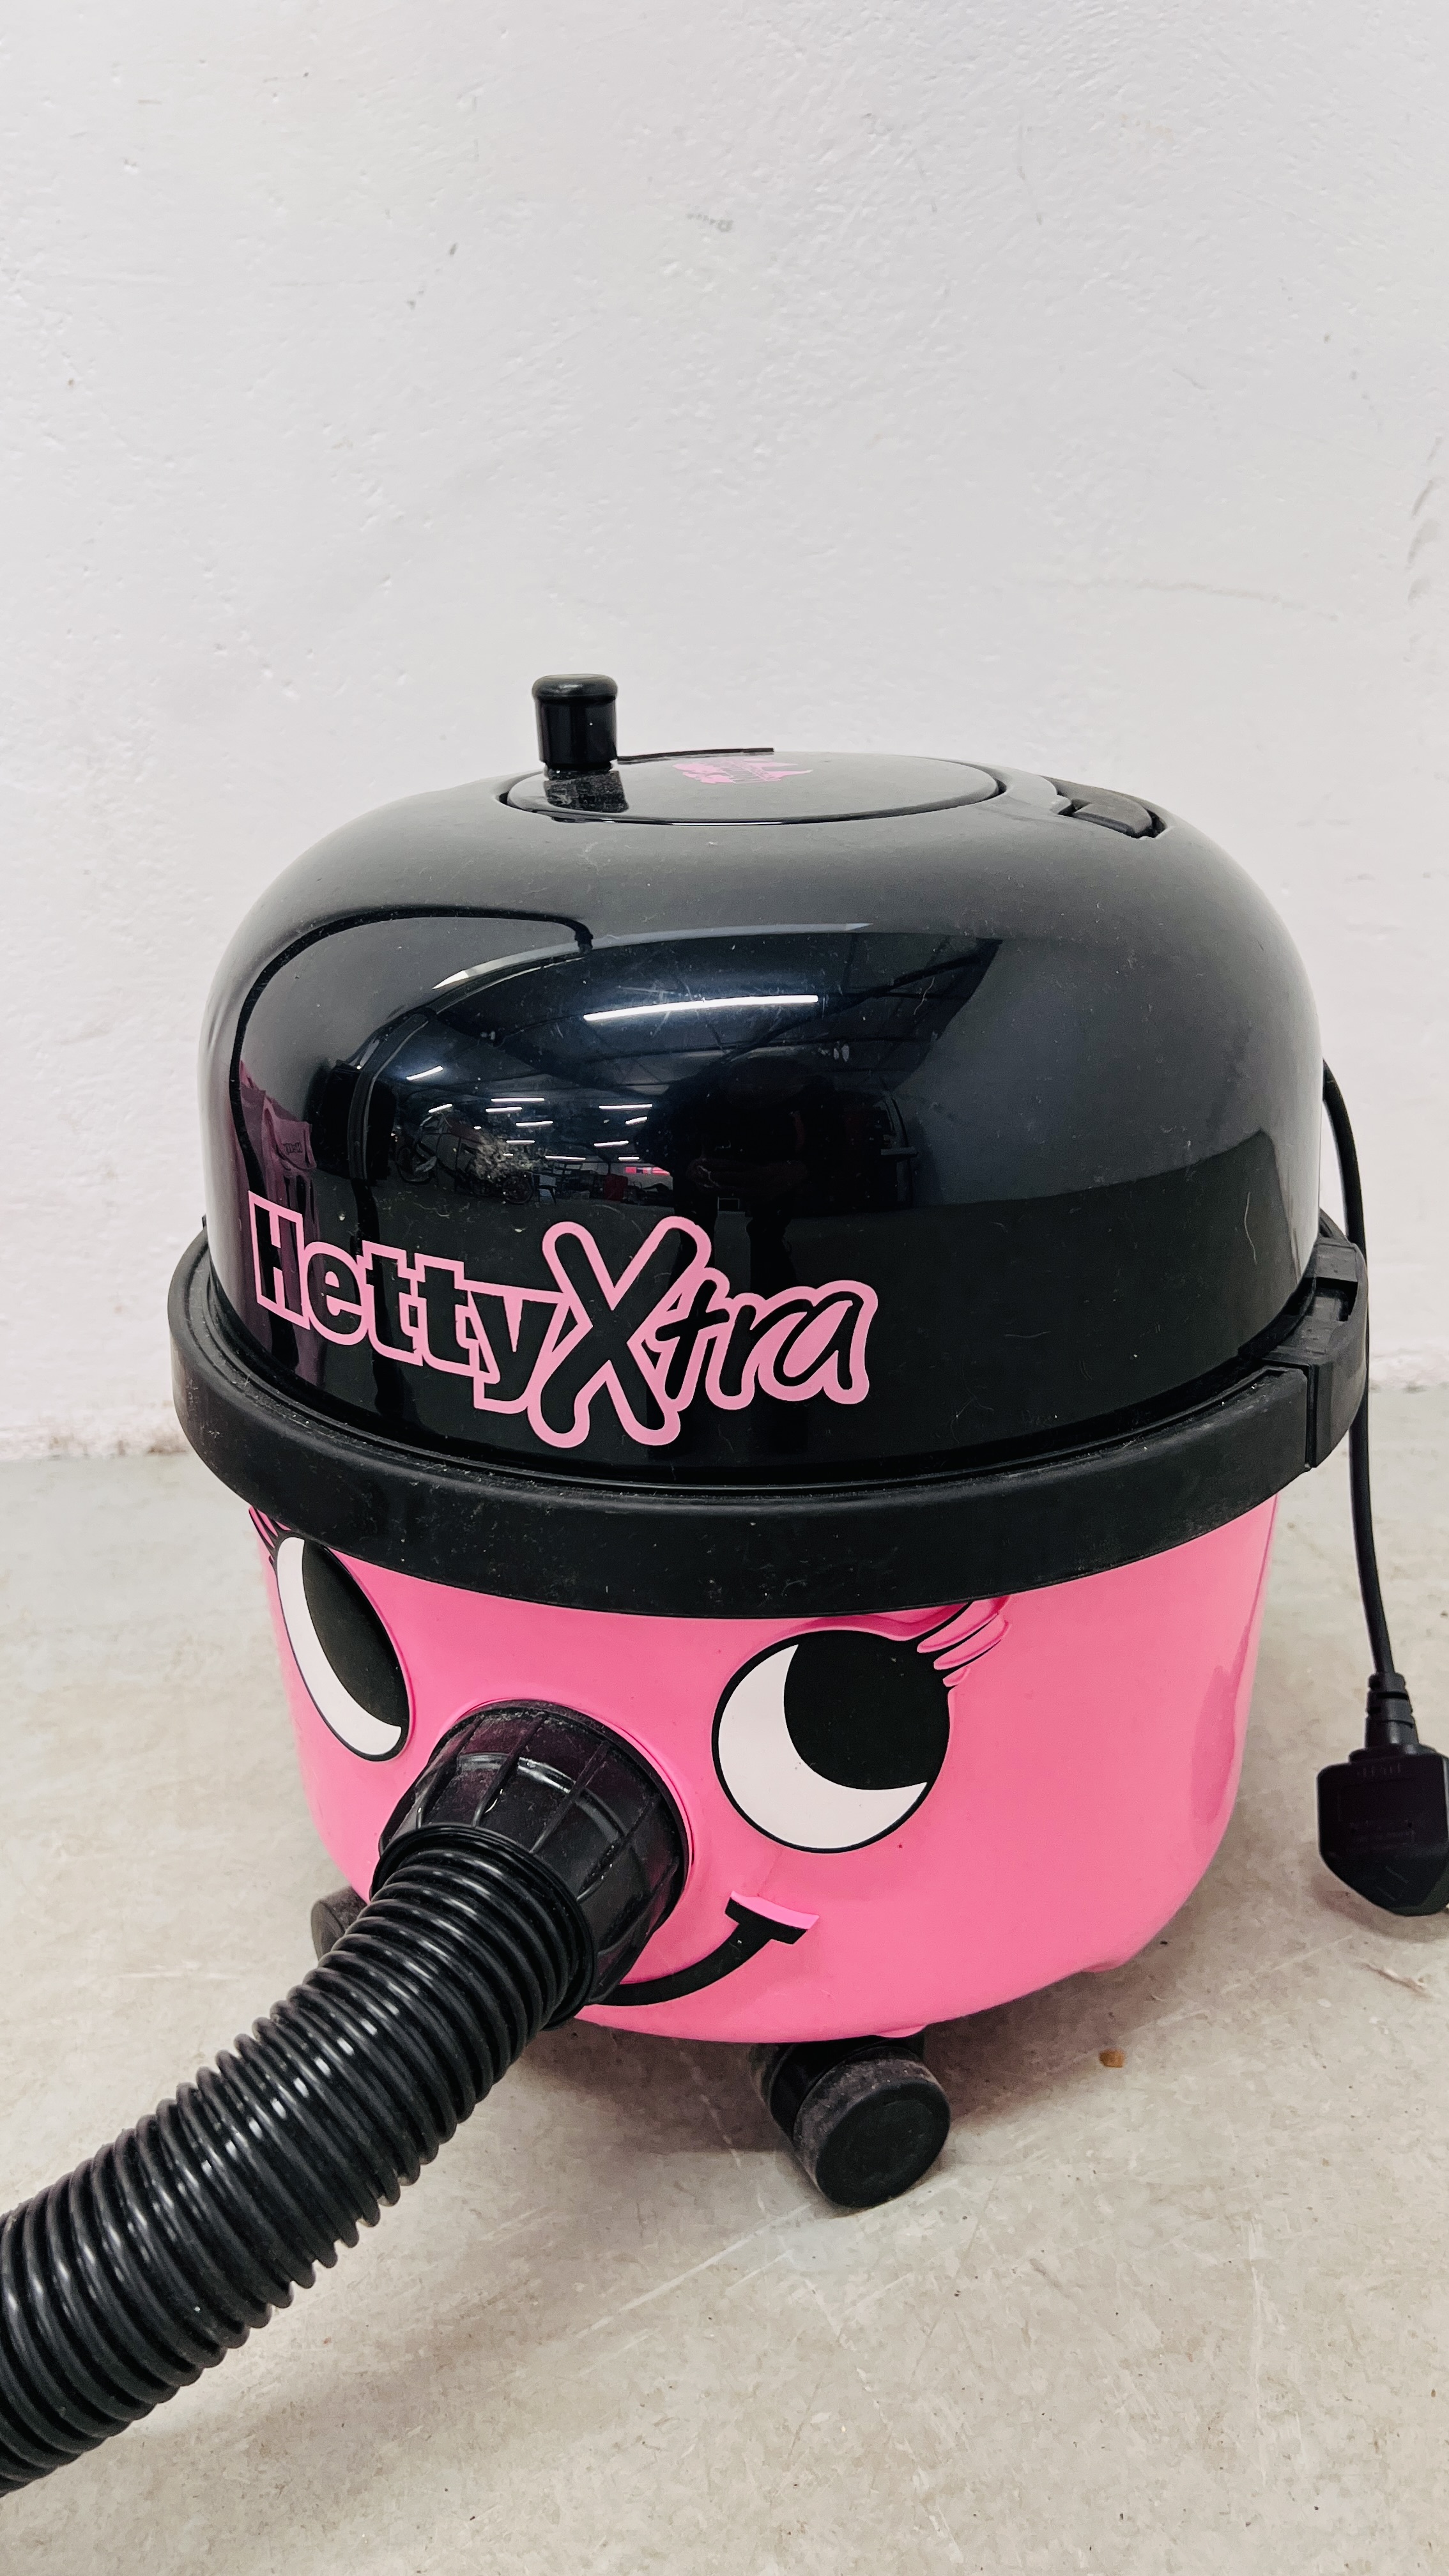 A NUMATIC "HETTY XTRA" VACUUM CLEANER WITH ACCESSORIES - SOLD AS SEEN. - Image 2 of 5